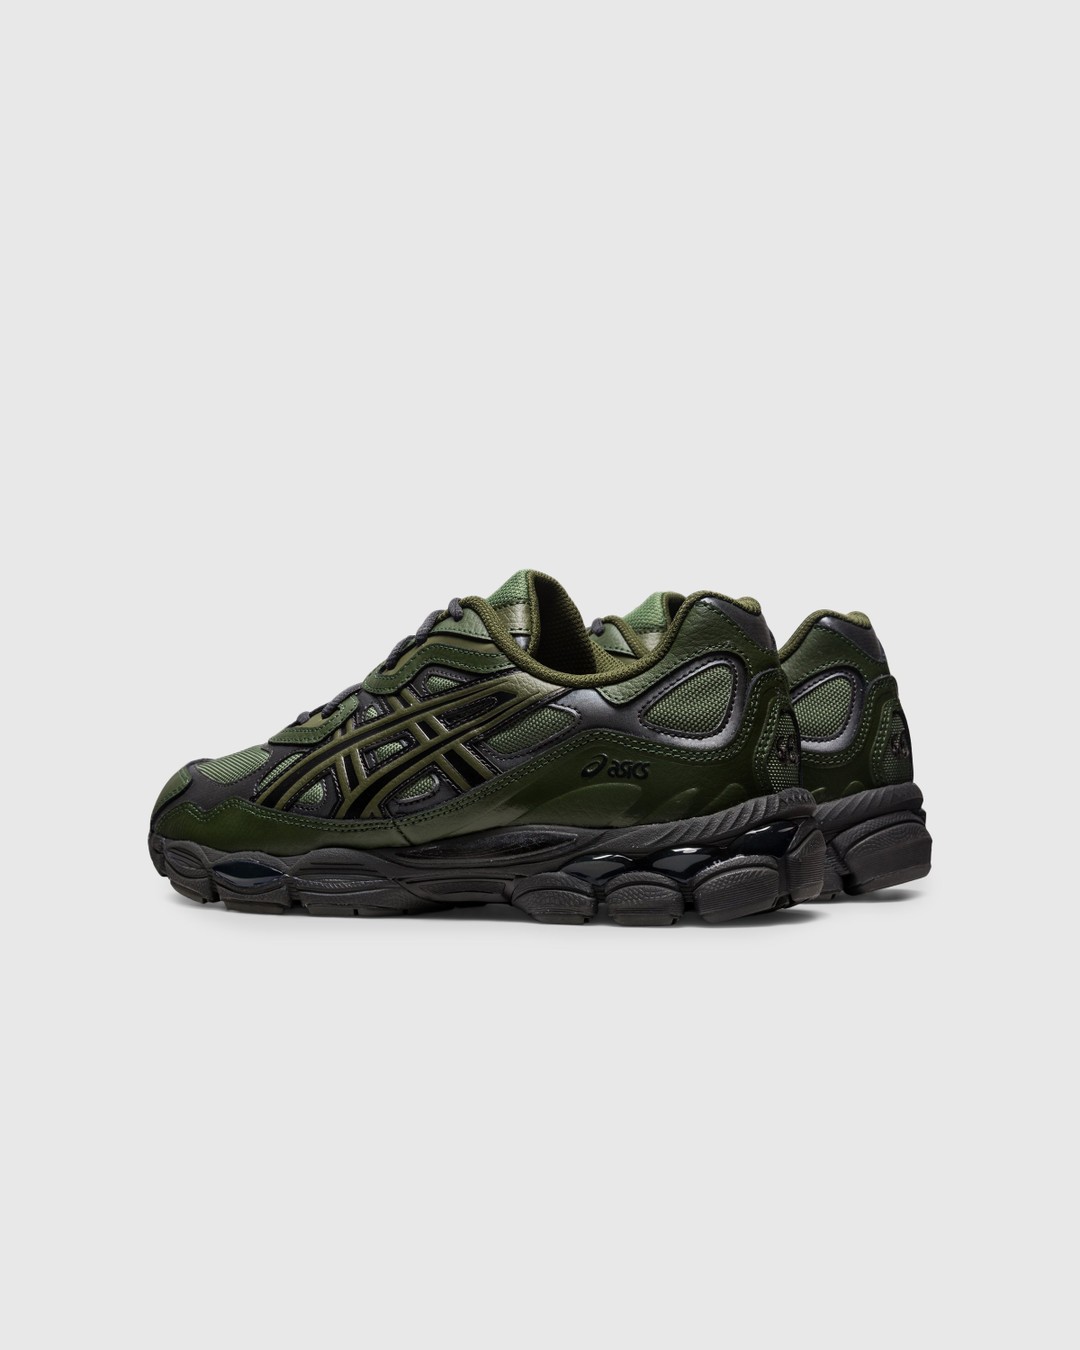 asics – GEL-NYC Moss/Forest - Sneakers - Green - Image 4